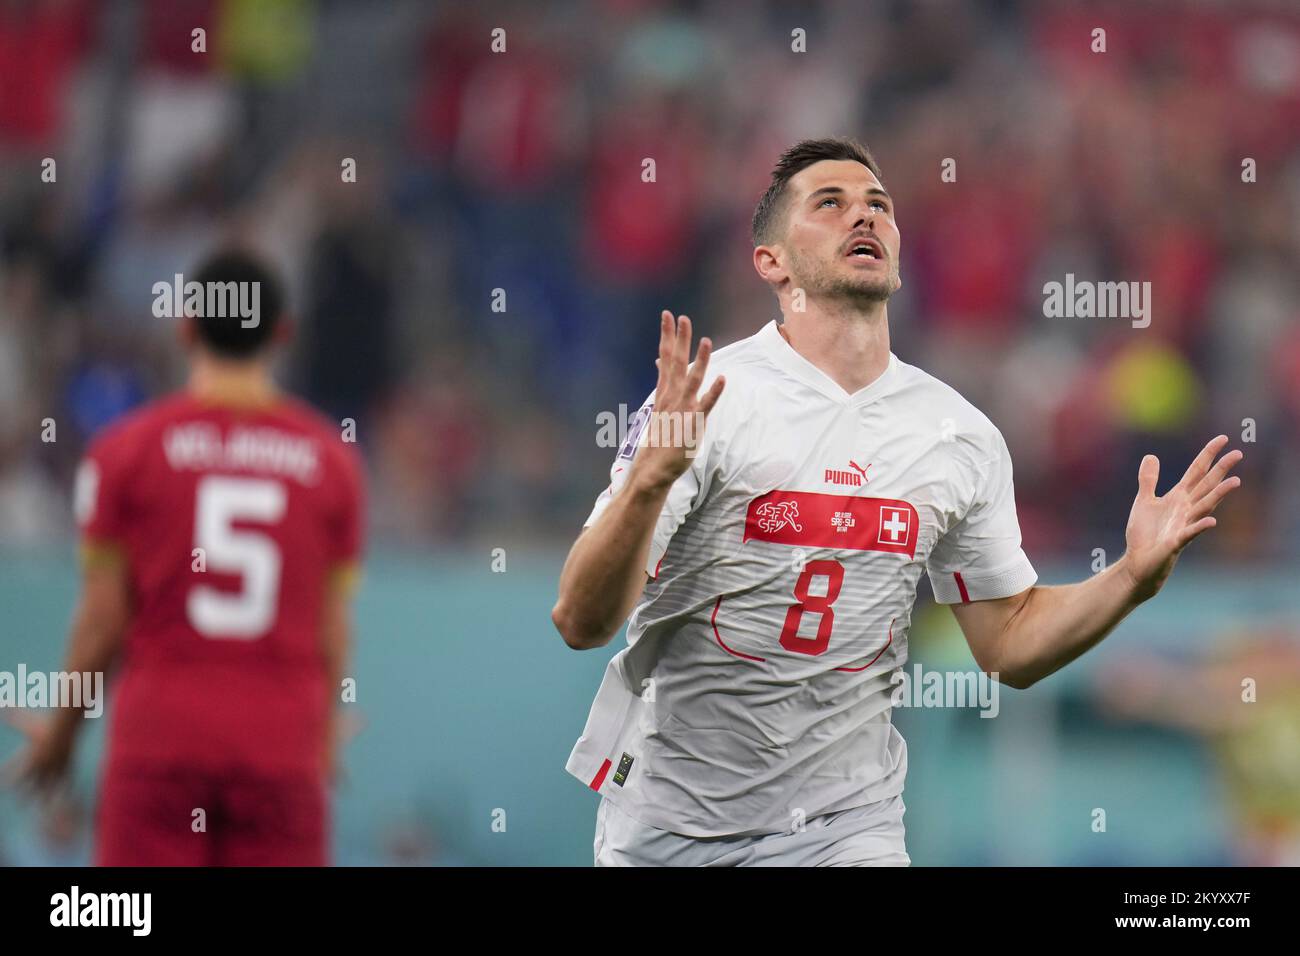 Doha, Qatar. 2nd Dec, 2022. Remo Freuler of Switzerland celebrates scoring during the Group G match between Serbia and Switzerland at the 2022 FIFA World Cup at Stadium 974 in Doha, Qatar, Dec. 2, 2022. Credit: Meng Dingbo/Xinhua/Alamy Live News Stock Photo